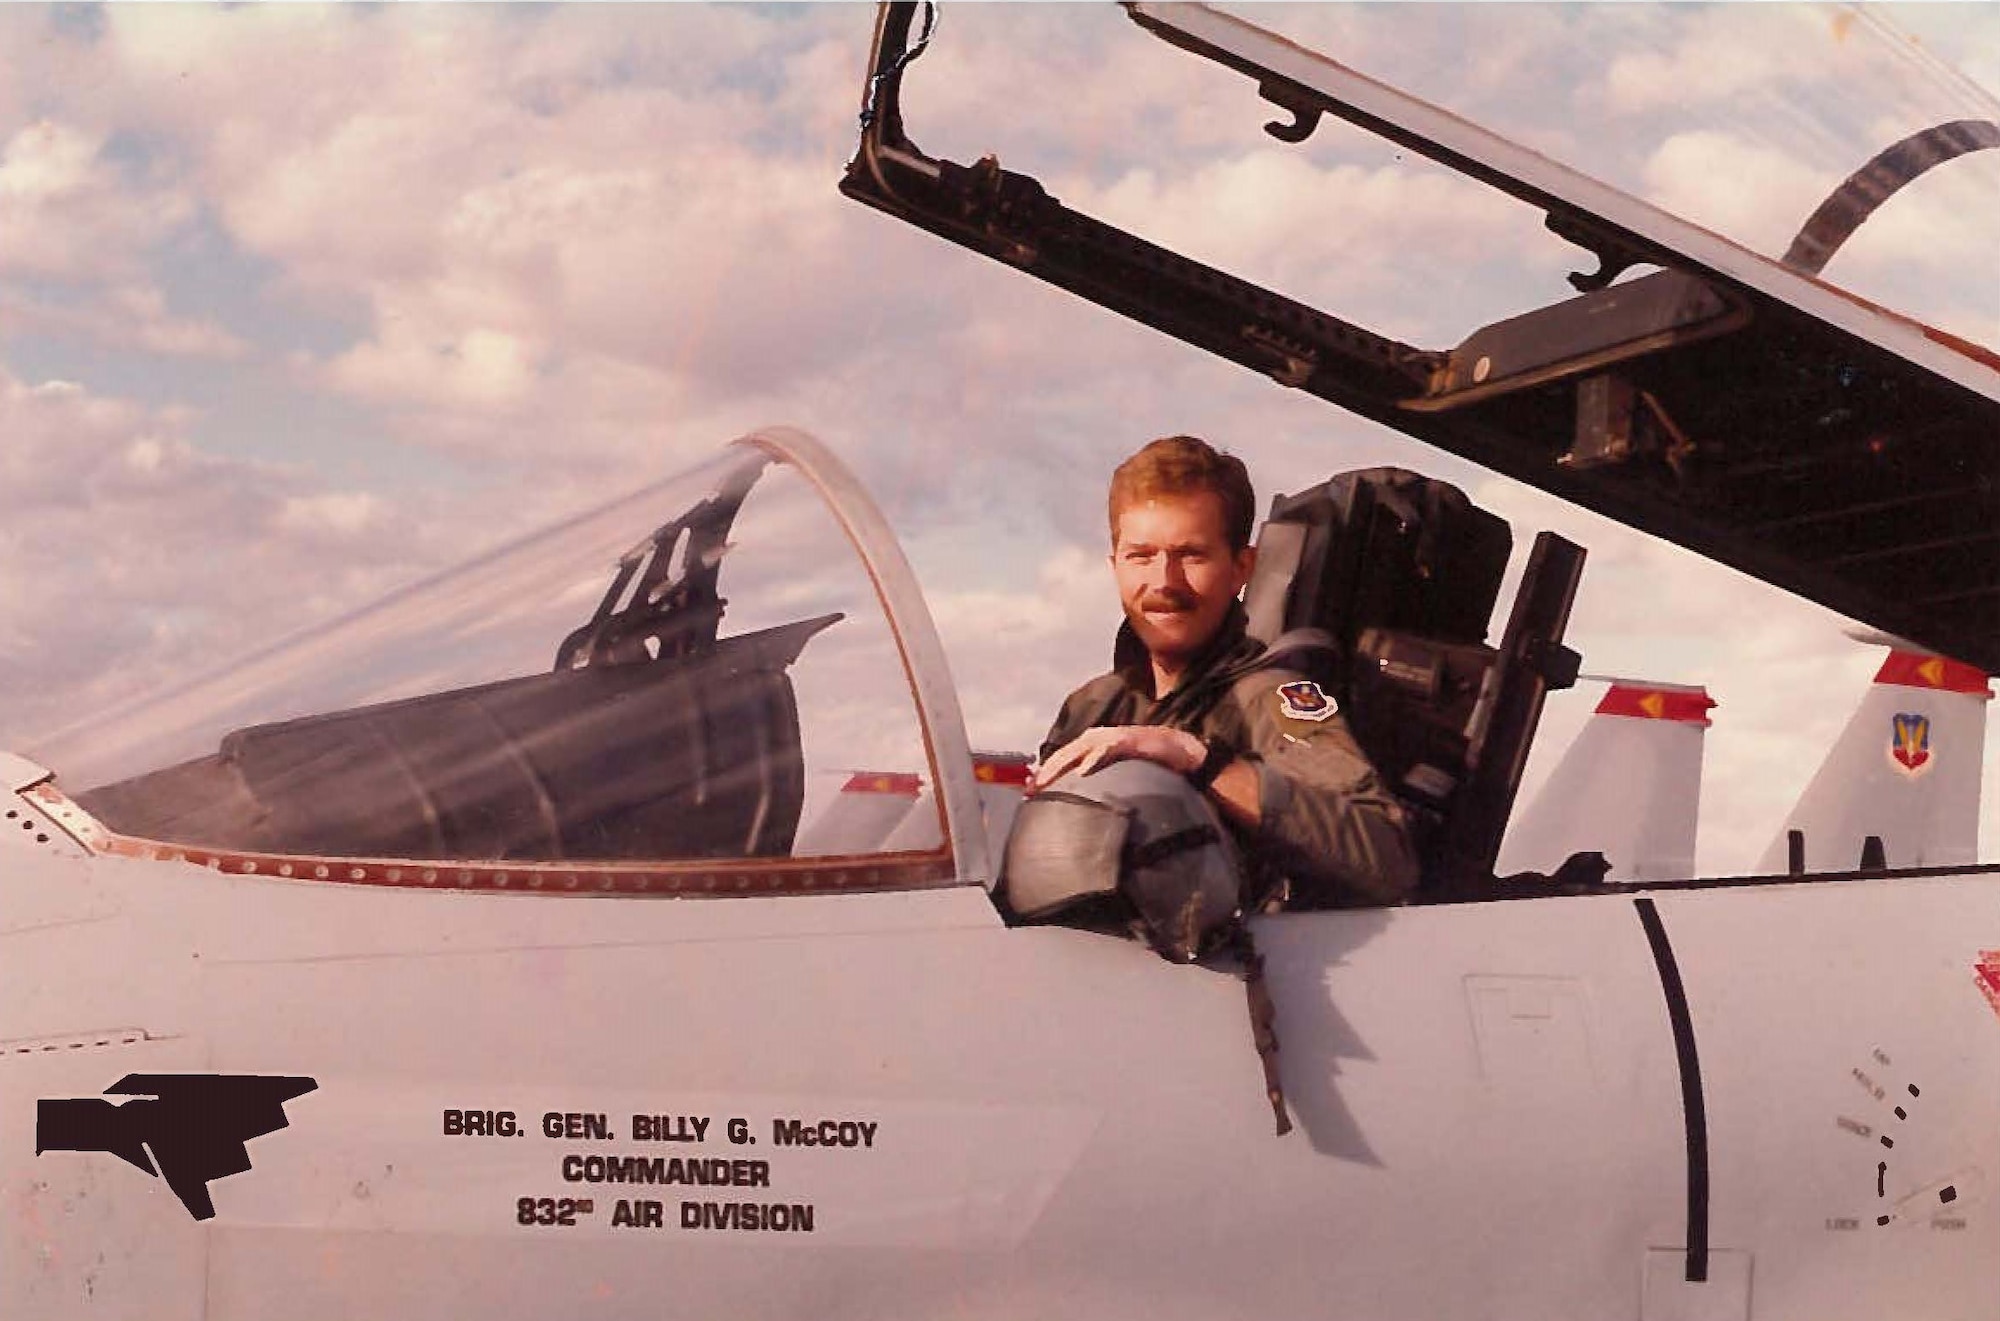 Staff Sgt. Jim Cagle prepares for takeoff in his Louisiana Air National Guard F-15A Eagle in an undisclosed location. Cagle served as a weapons systems officer with the F-4C Phantom II prior to becoming a fighter pilot.  (U.S. Air Force courtesy photo)